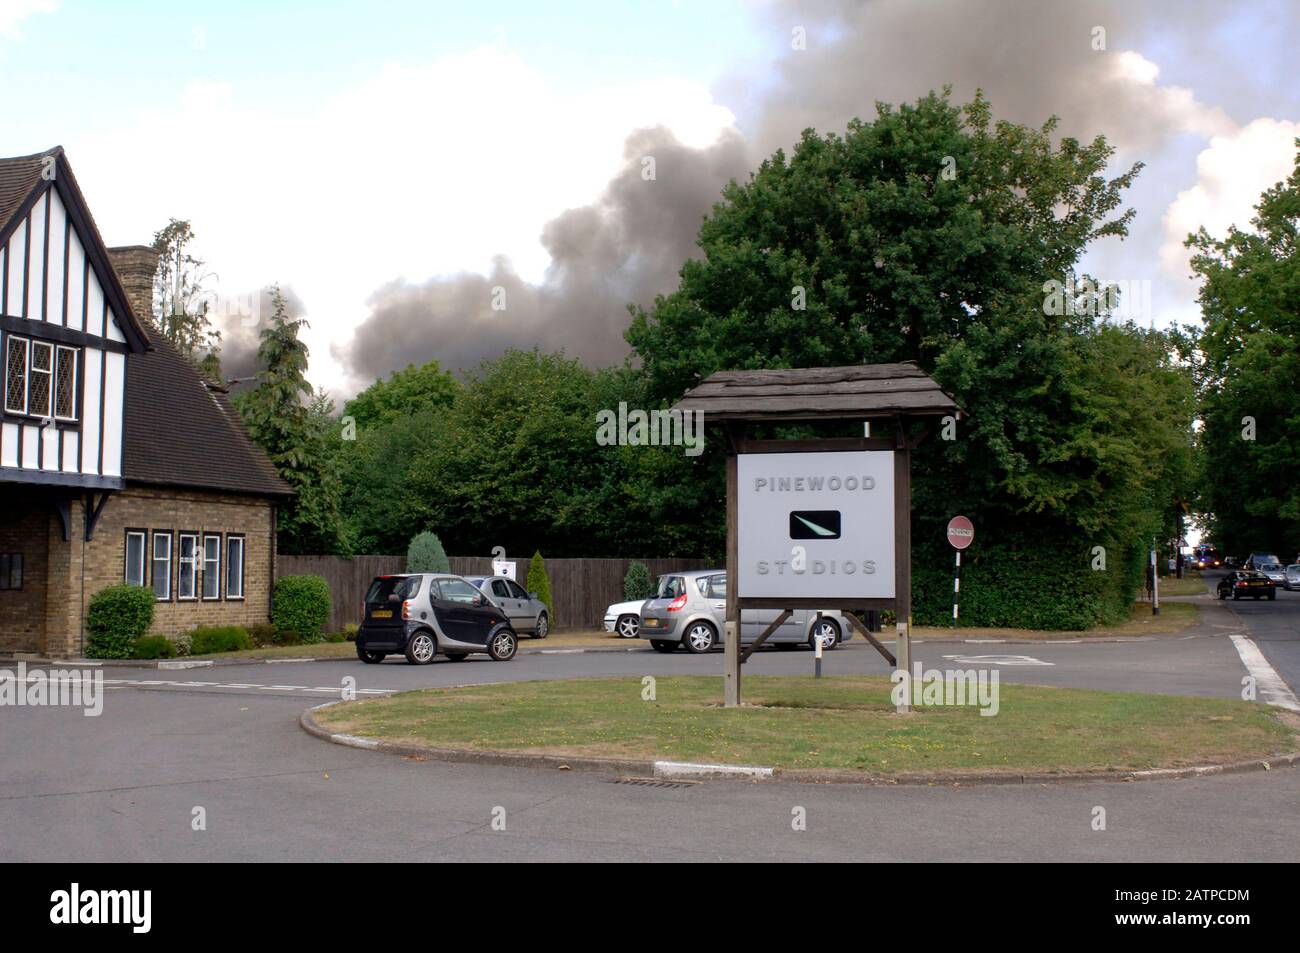 The James Bond The Albert R. Broccoli 007 Stage film set at Pinewood Studios on fire in 2006. Stock Photo